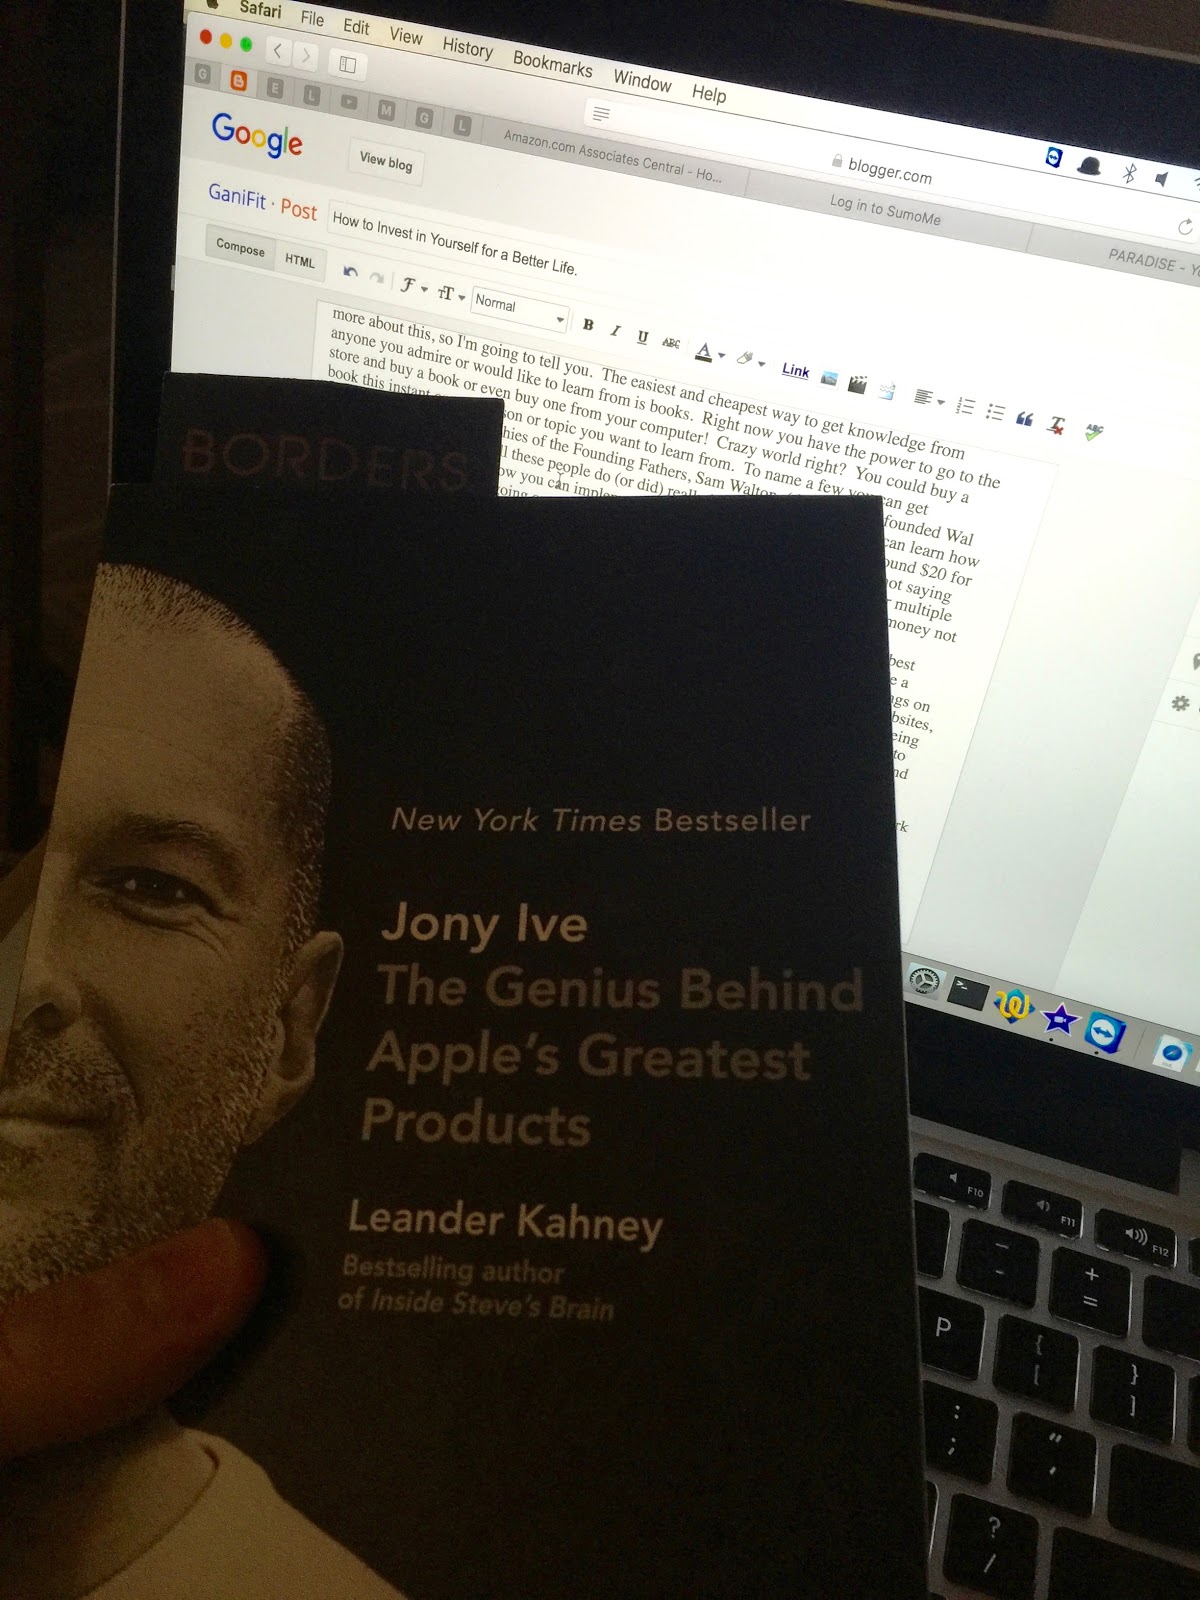 Investing in myself for a better life by reading a biography on Jony Ive.